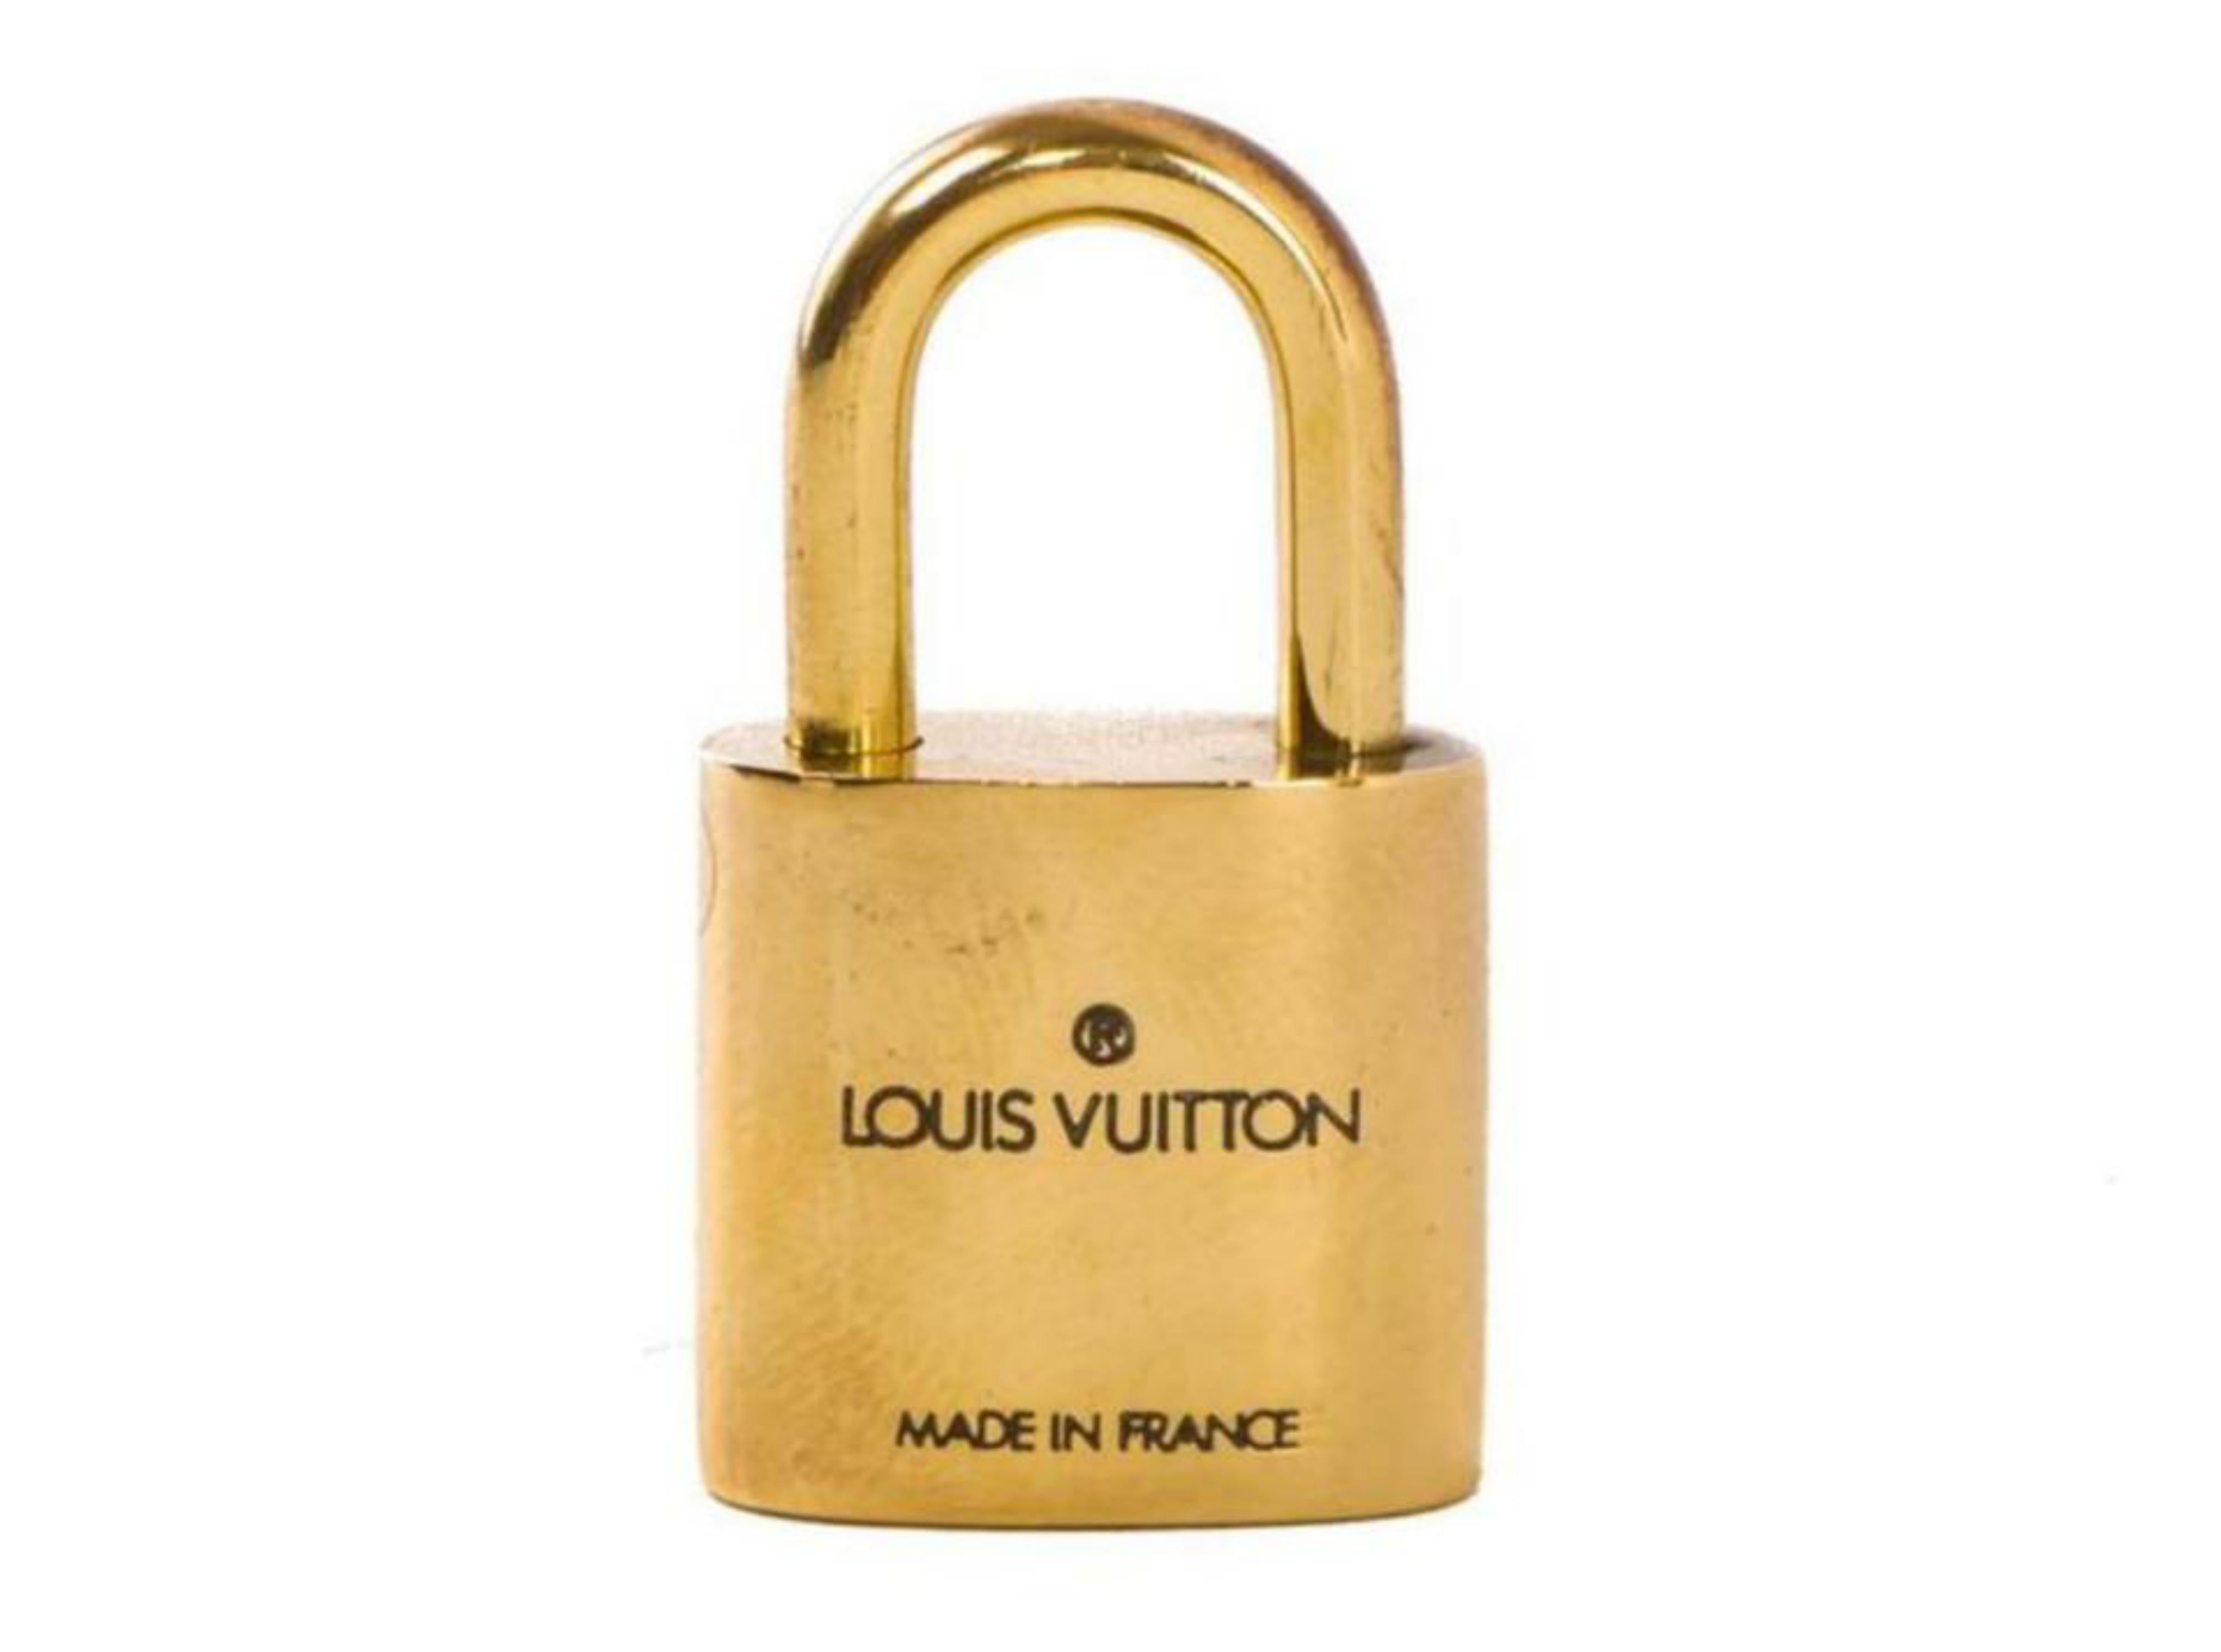 Louis Vuitton Gold Single Key Lock Pad Lock and Key 867732 For Sale 1